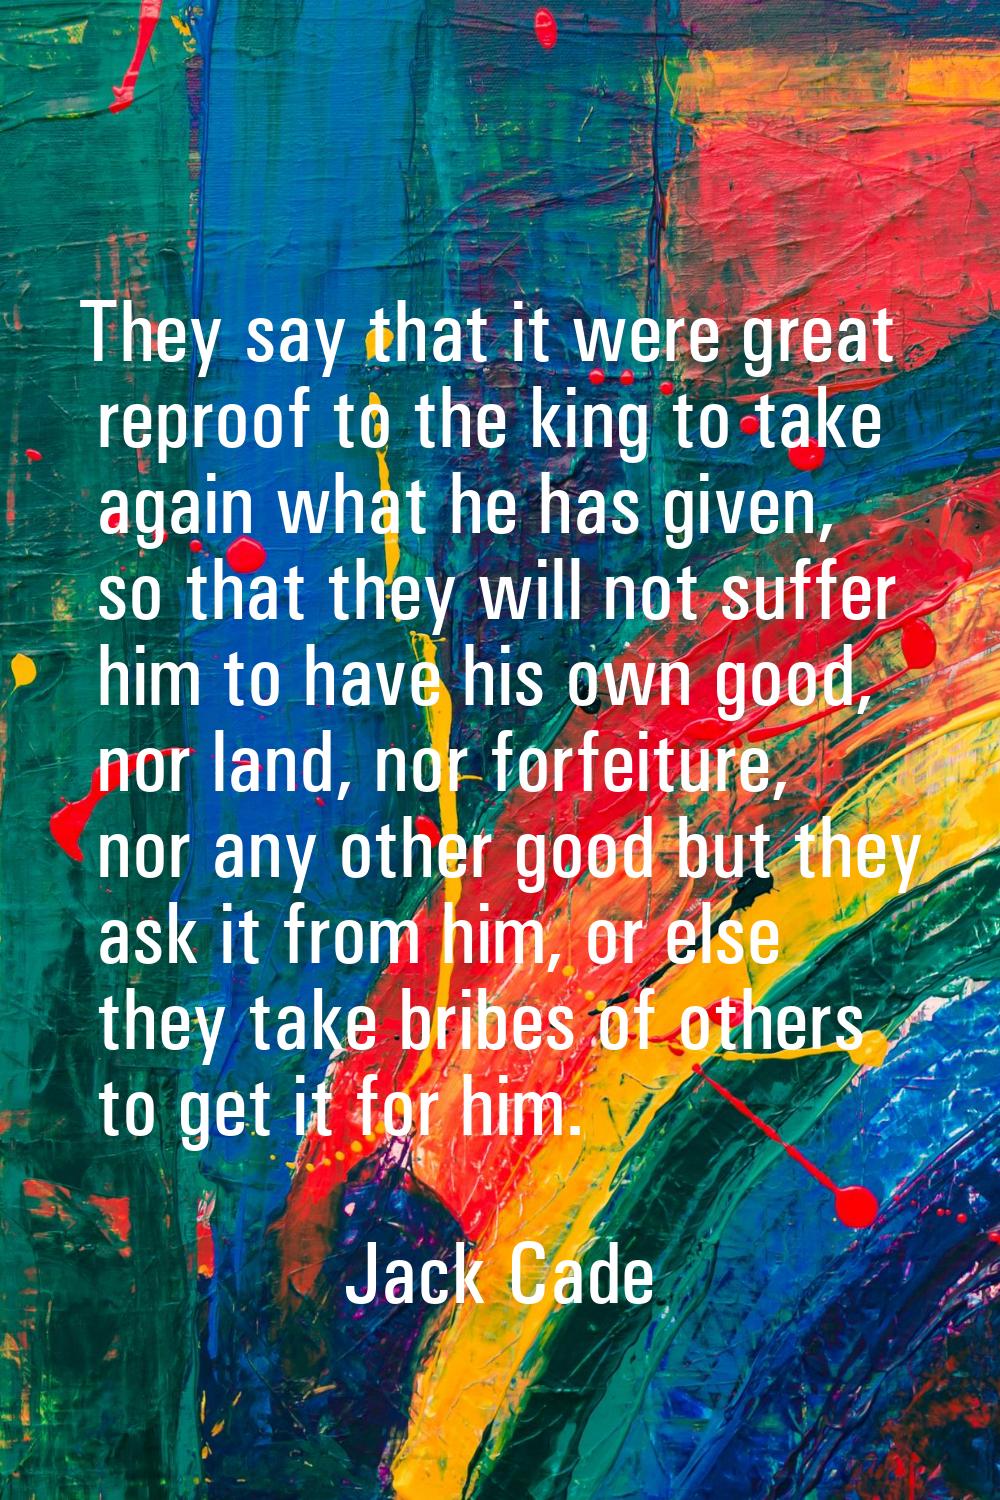 They say that it were great reproof to the king to take again what he has given, so that they will 